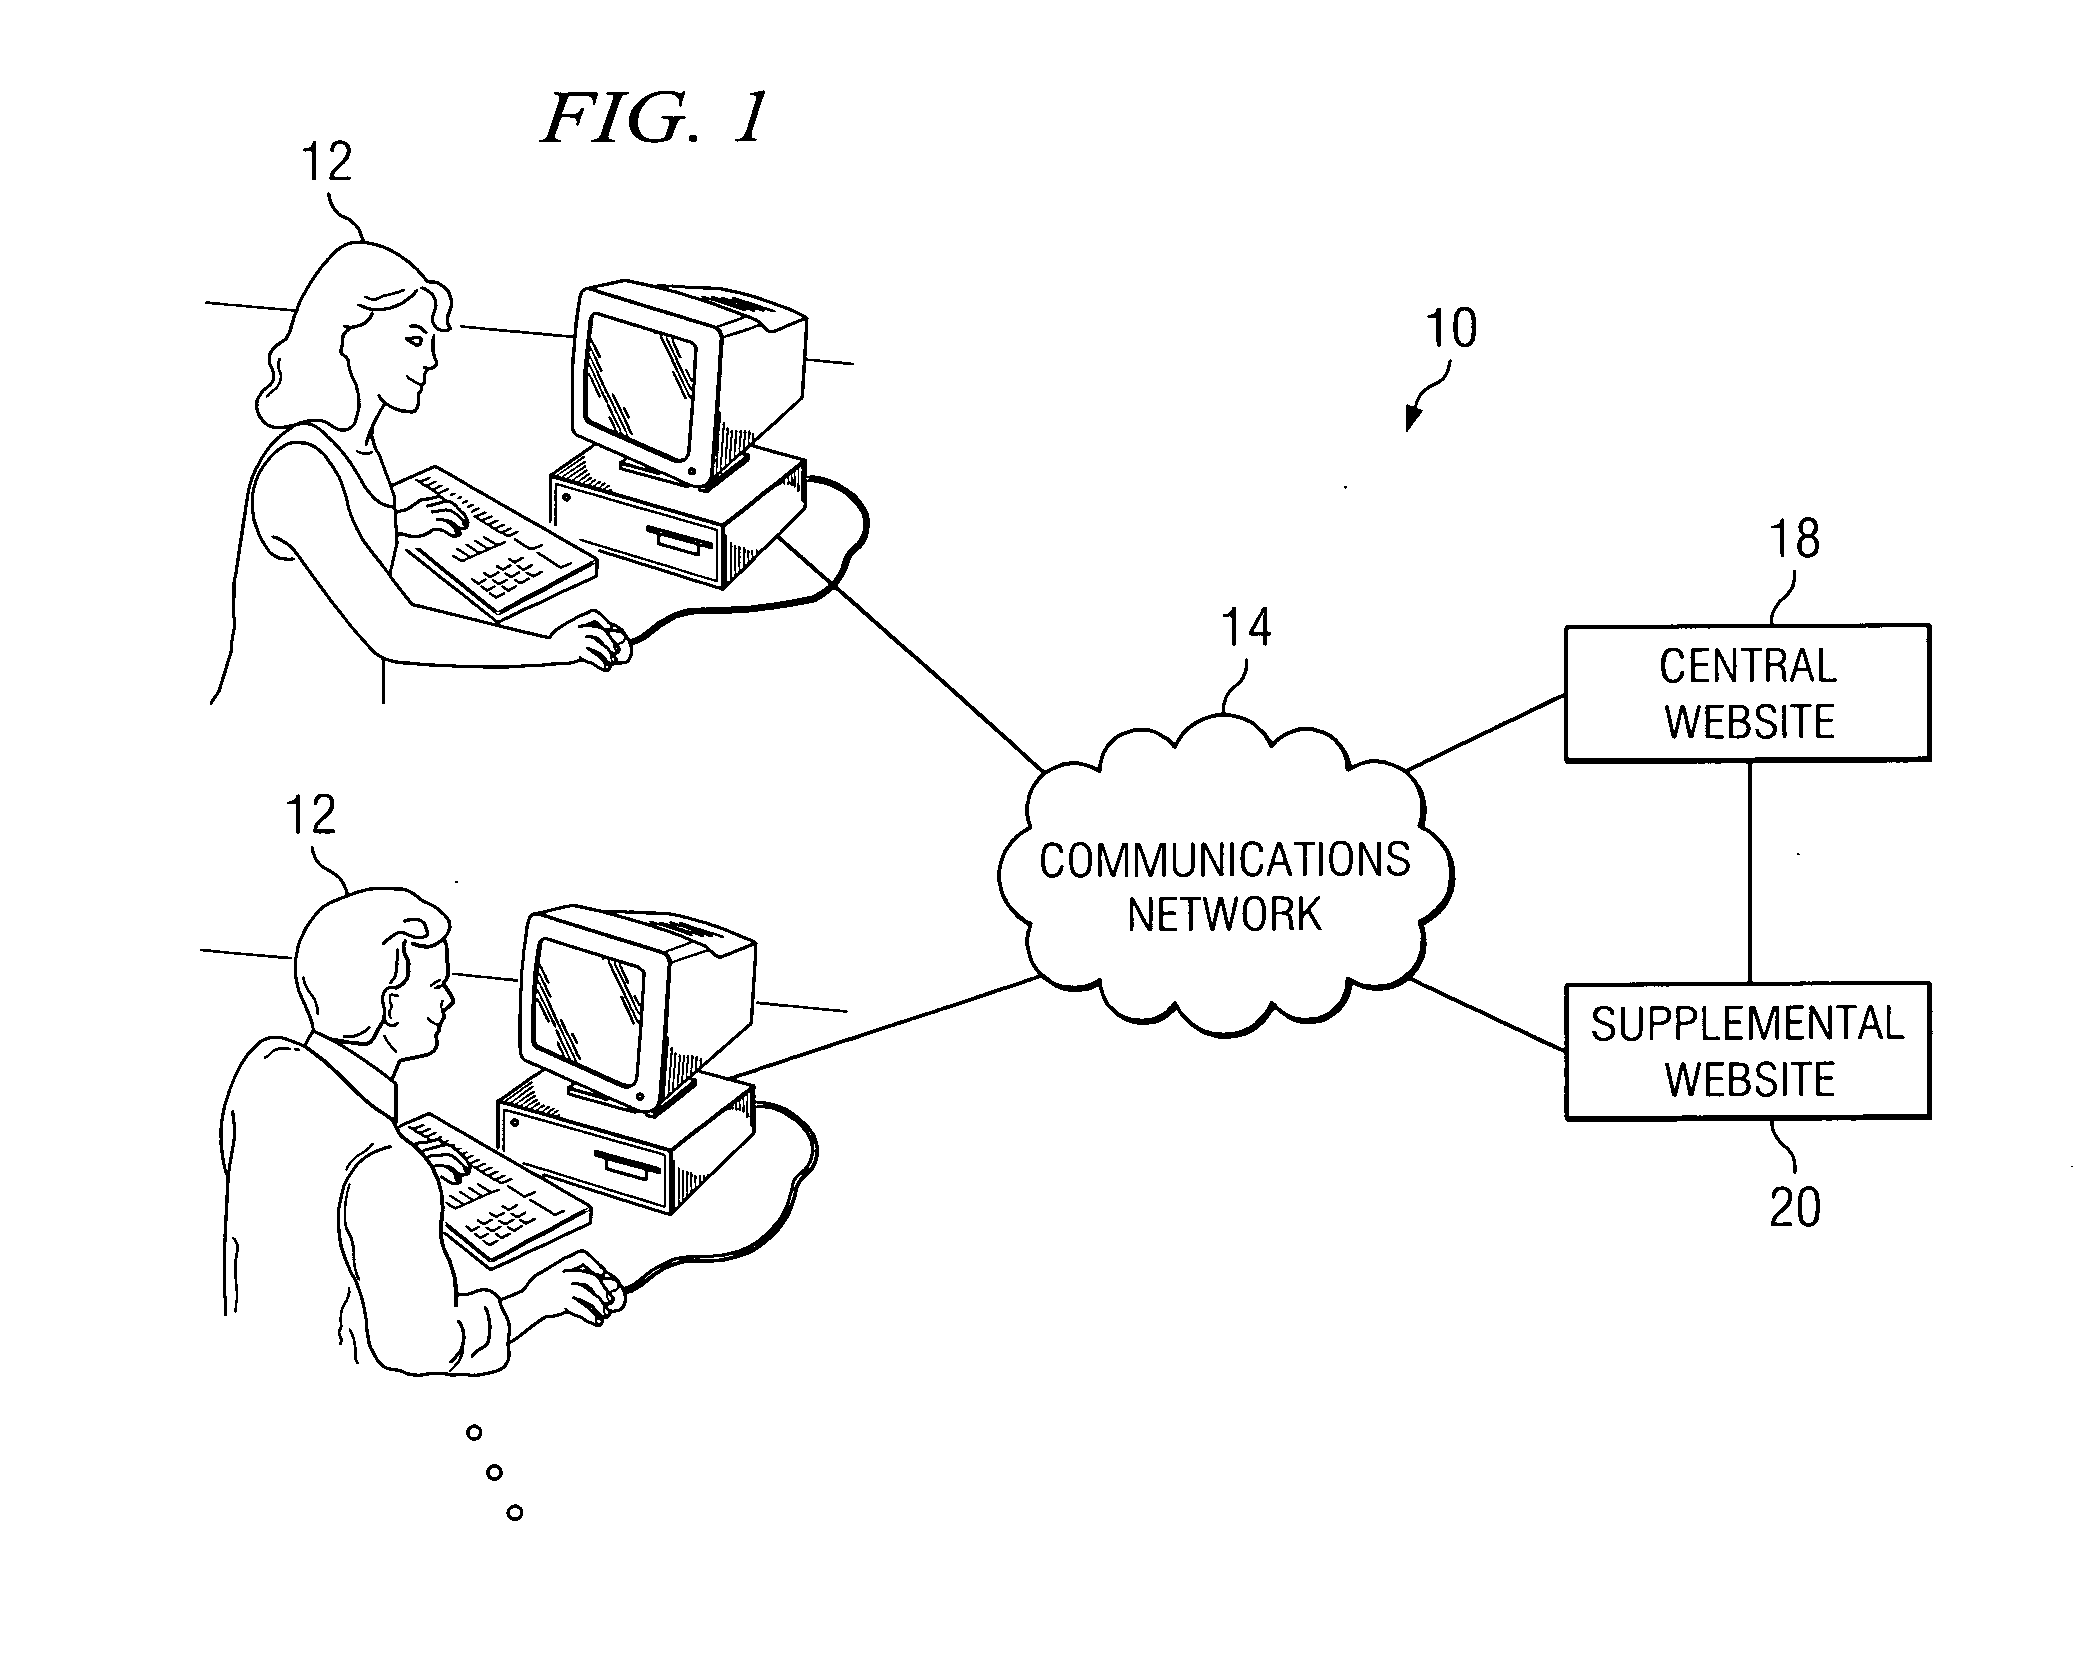 System and method for providing a post-date component in a network environment